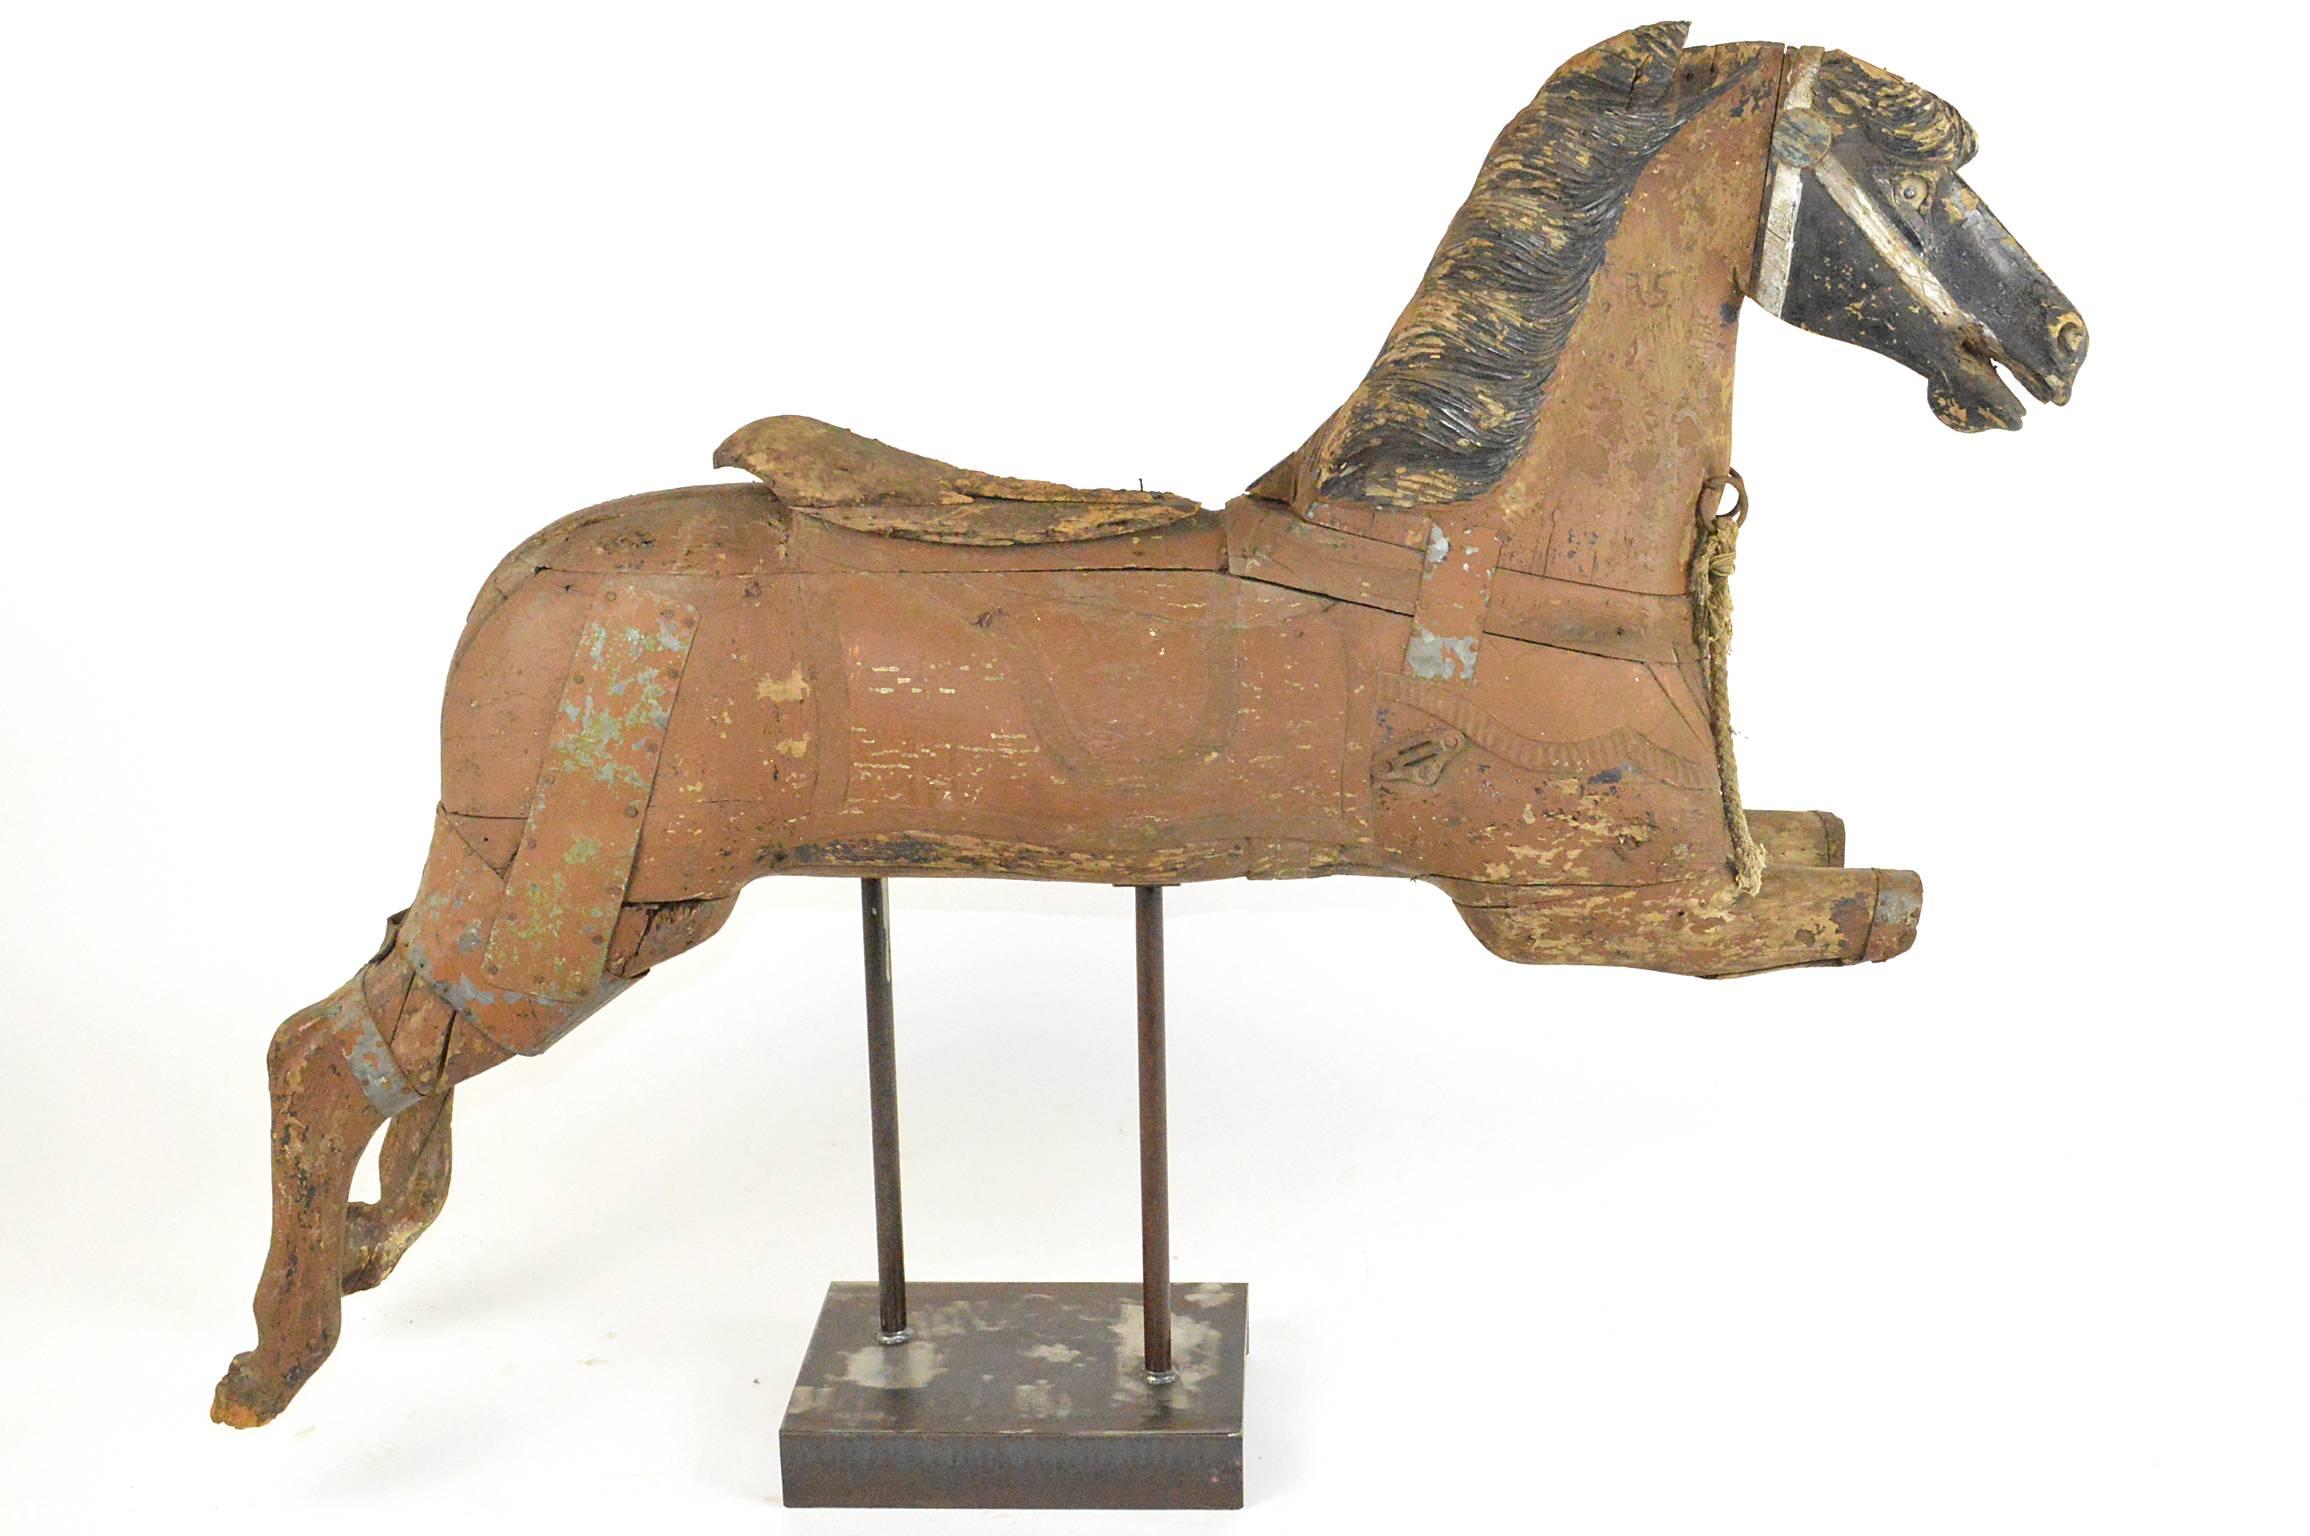 Late 19th century carousel horse nicely carved and mounted on custom stand with traces of original paint and accents.